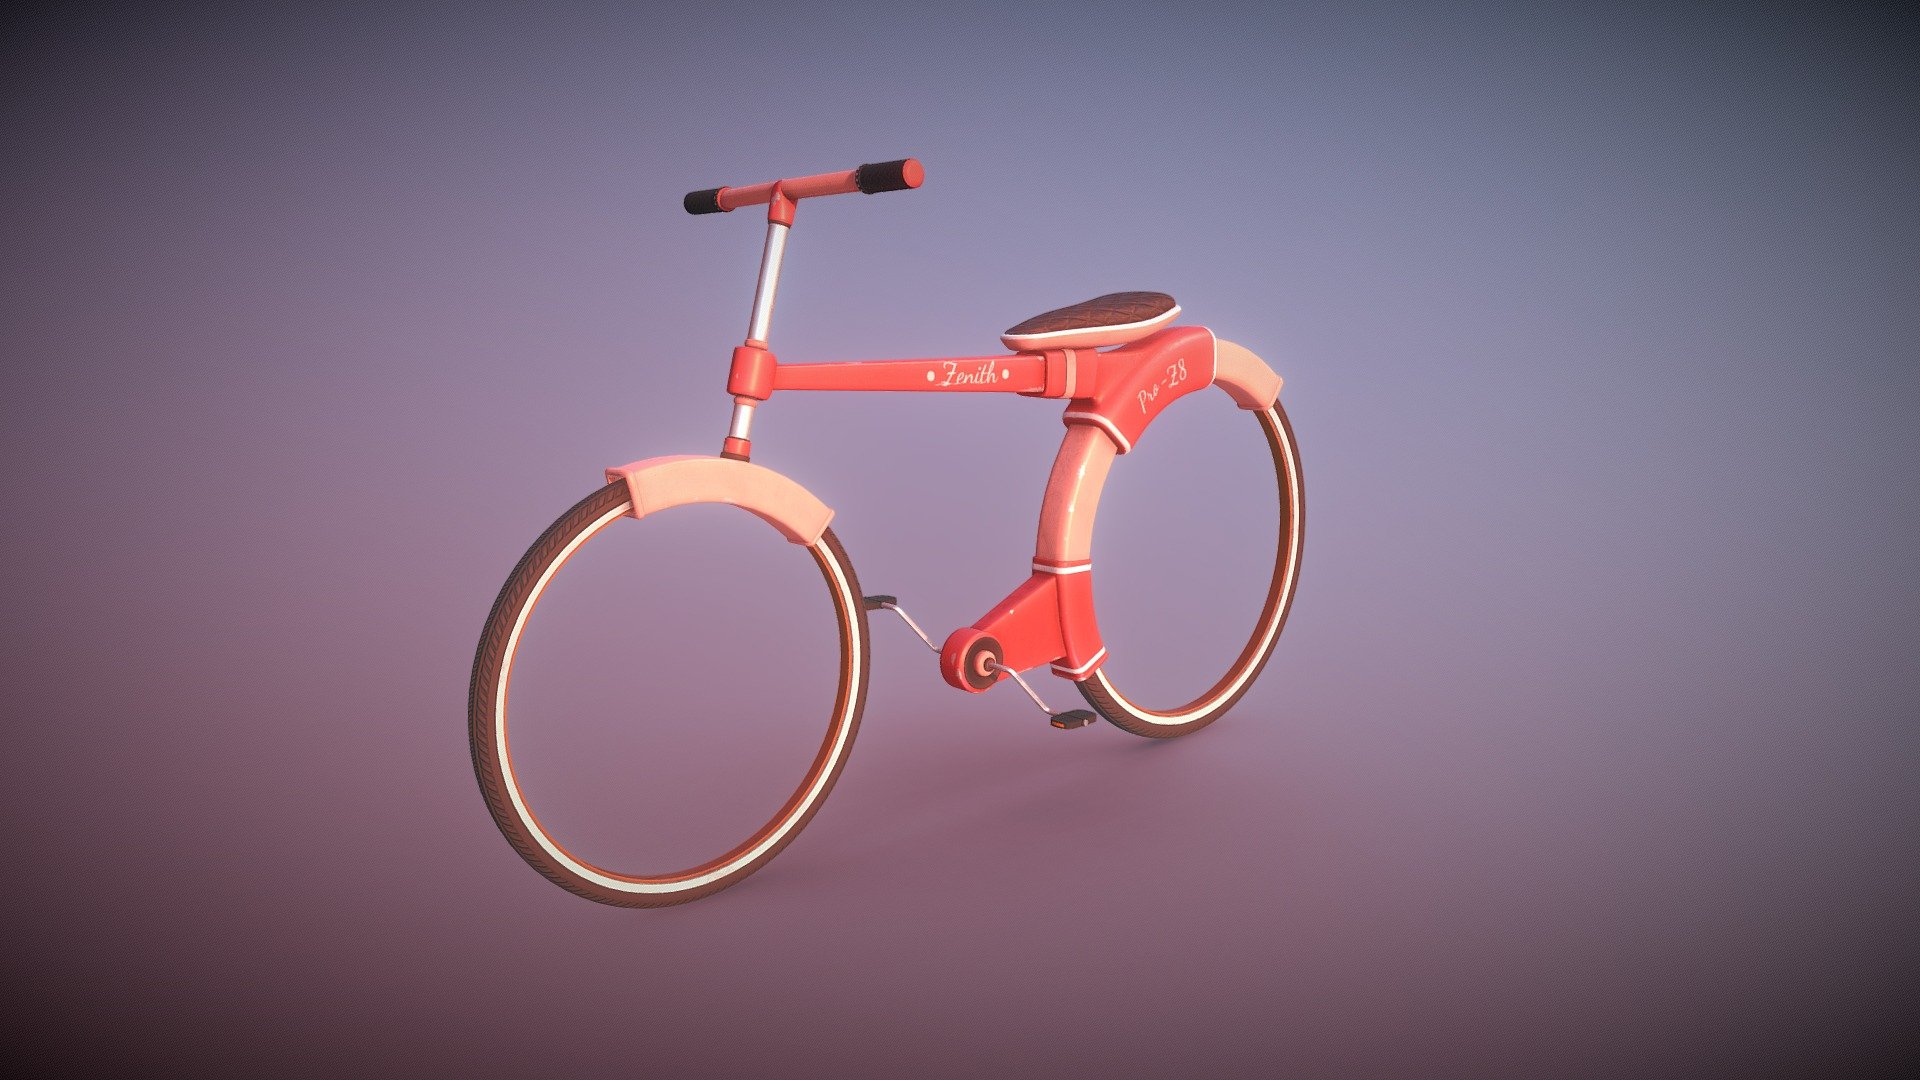 The Zenith Pro-Z8 bicycle! New semi-futuristic chainless bike! My stylized version of a chainless bike. I made this as part of set decoration for a much bigger project I'm currently working on. Modelled in 3DS Max (2021) and textured in substance painter 3d model